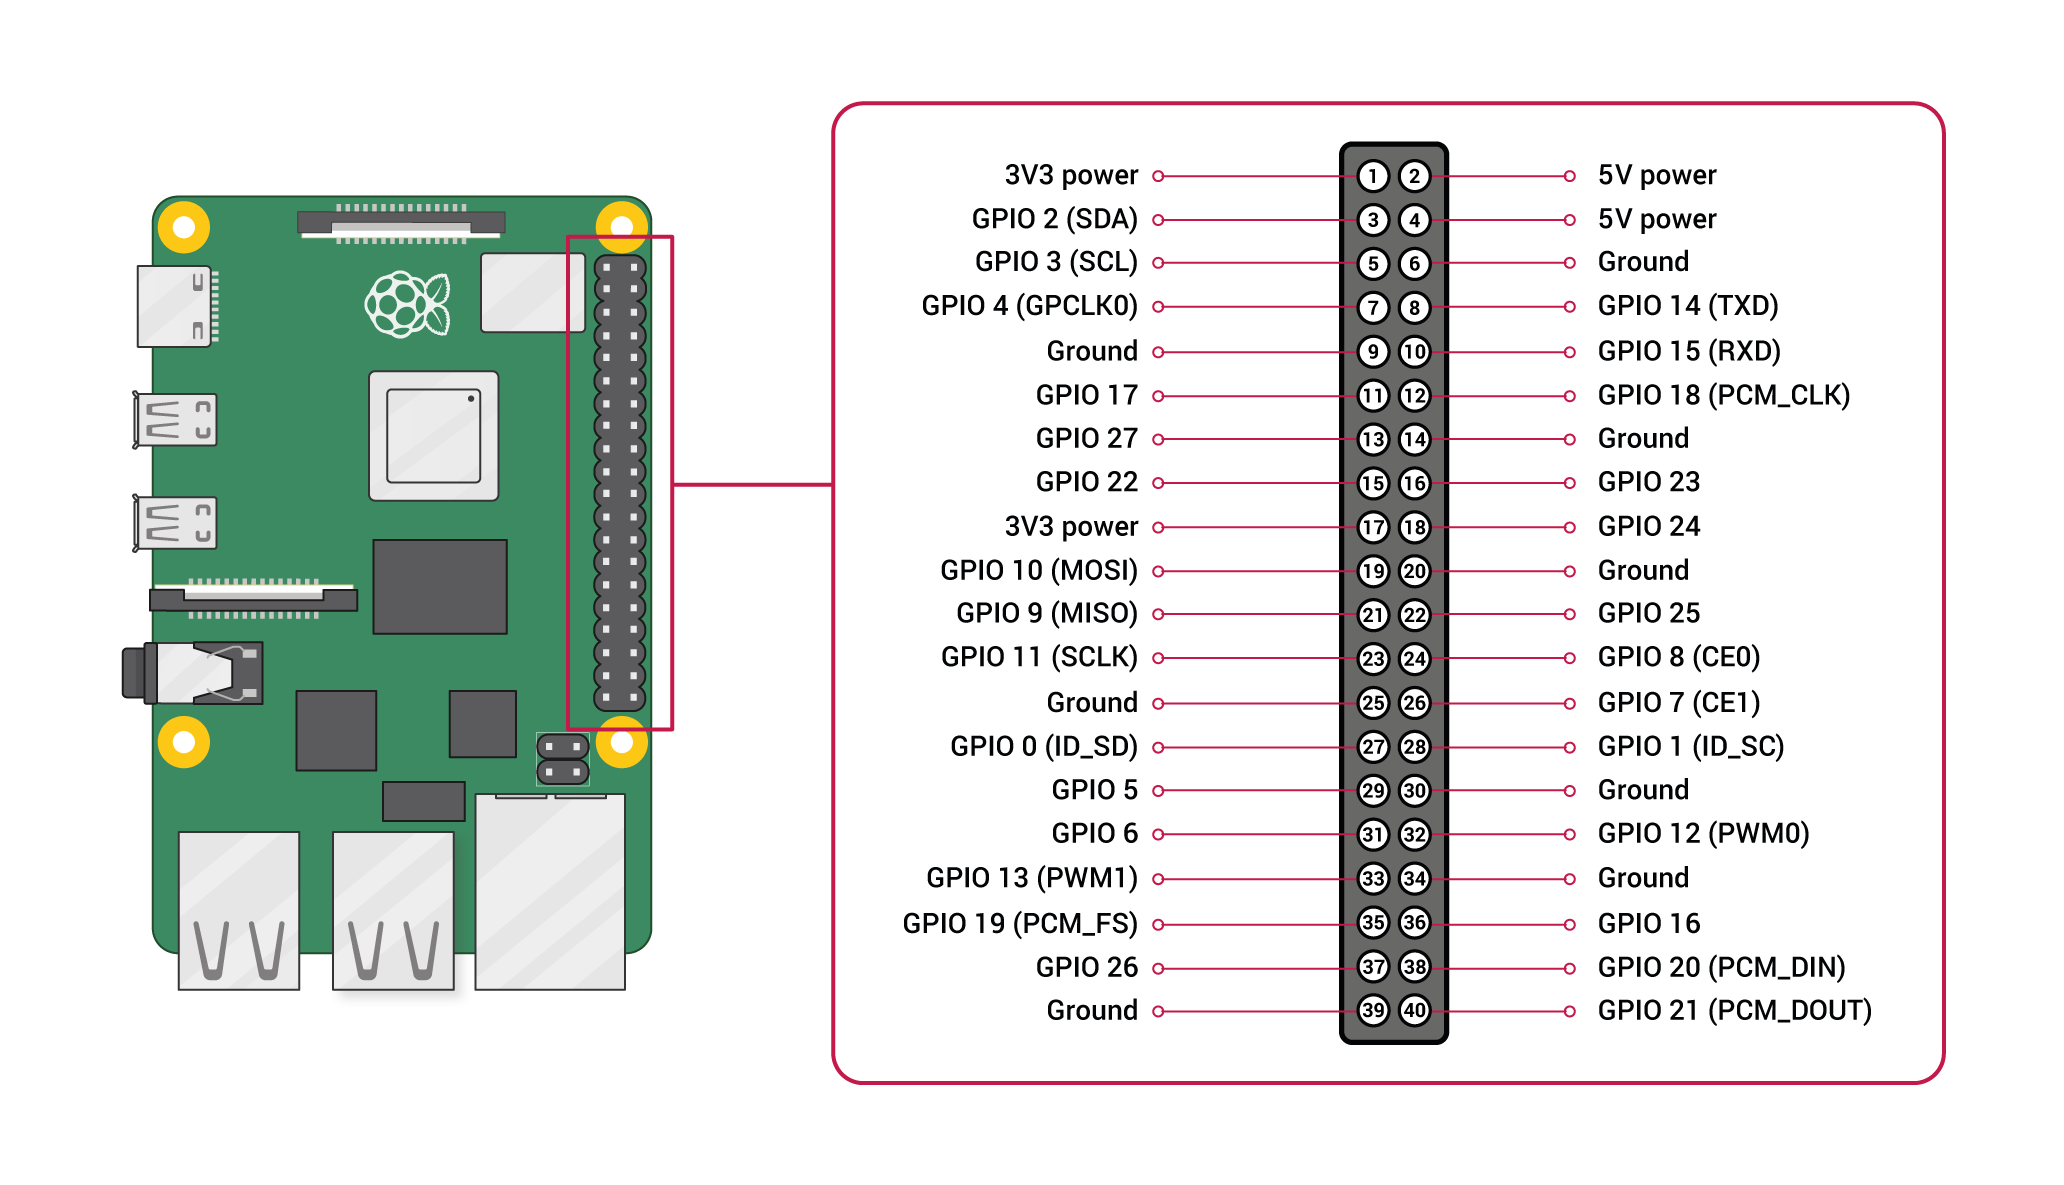 Raspberry Pi's 40-pin GPIO pin layout (taken from: https://www.raspberrypi.com/documentation/computers/images/GPIO-Pinout-Diagram-2.png)